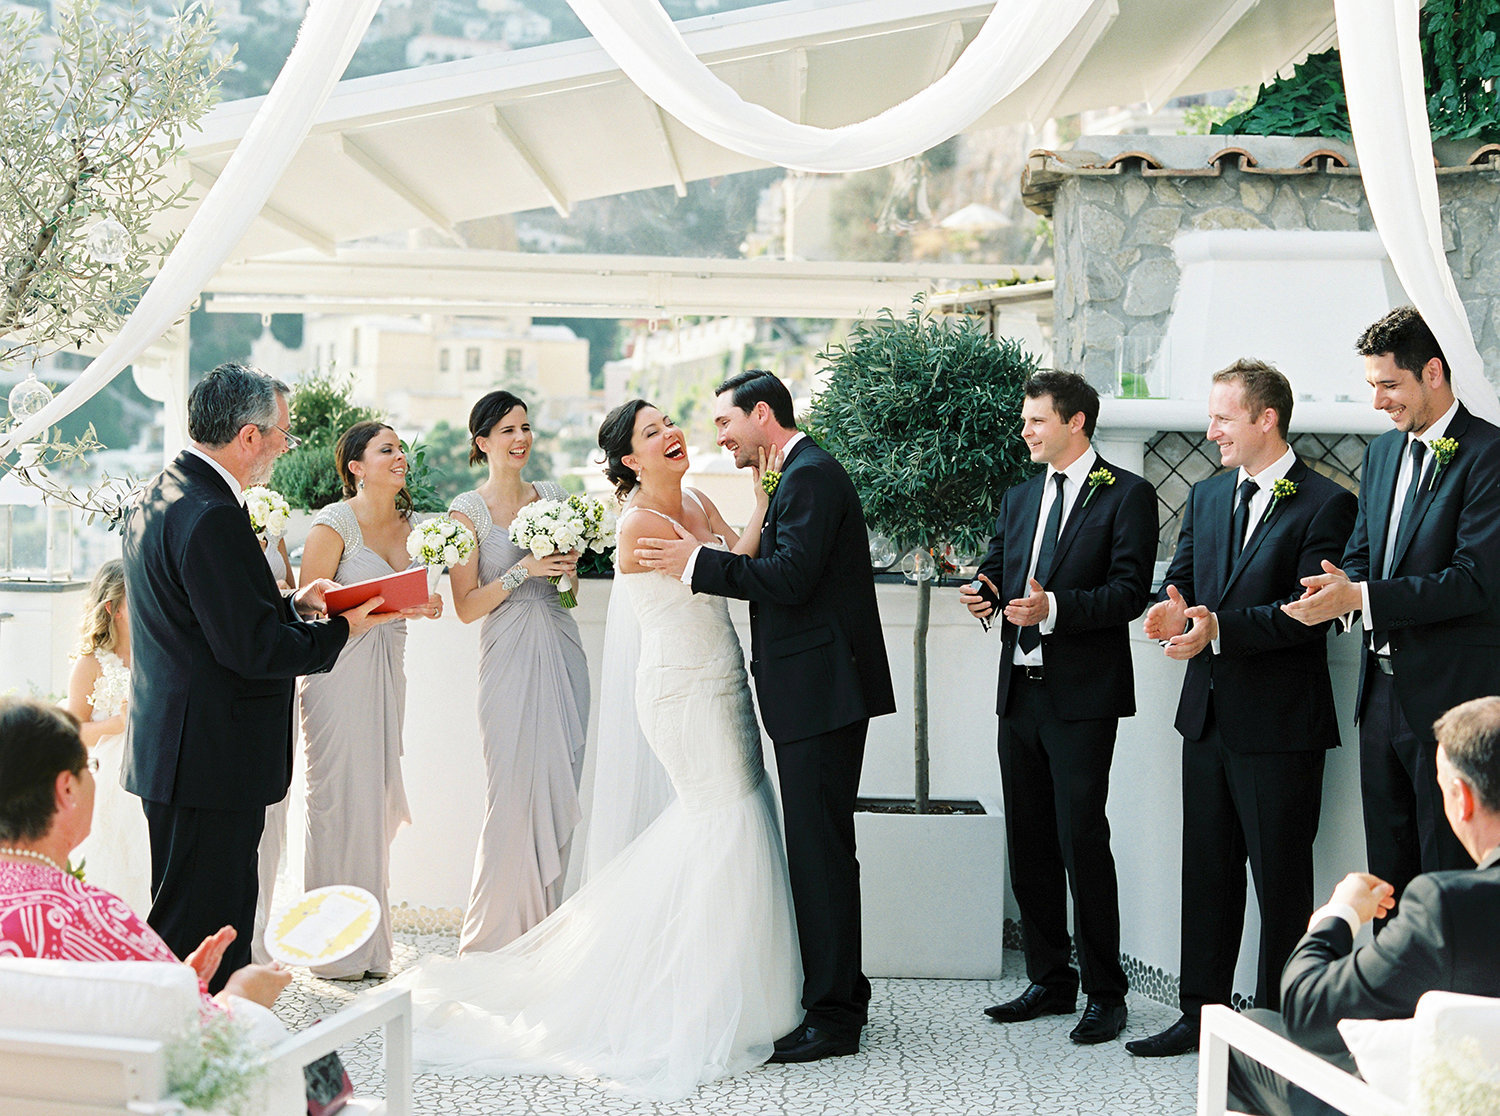 Wedding ceremony in Positano and the bride is laughing out loud